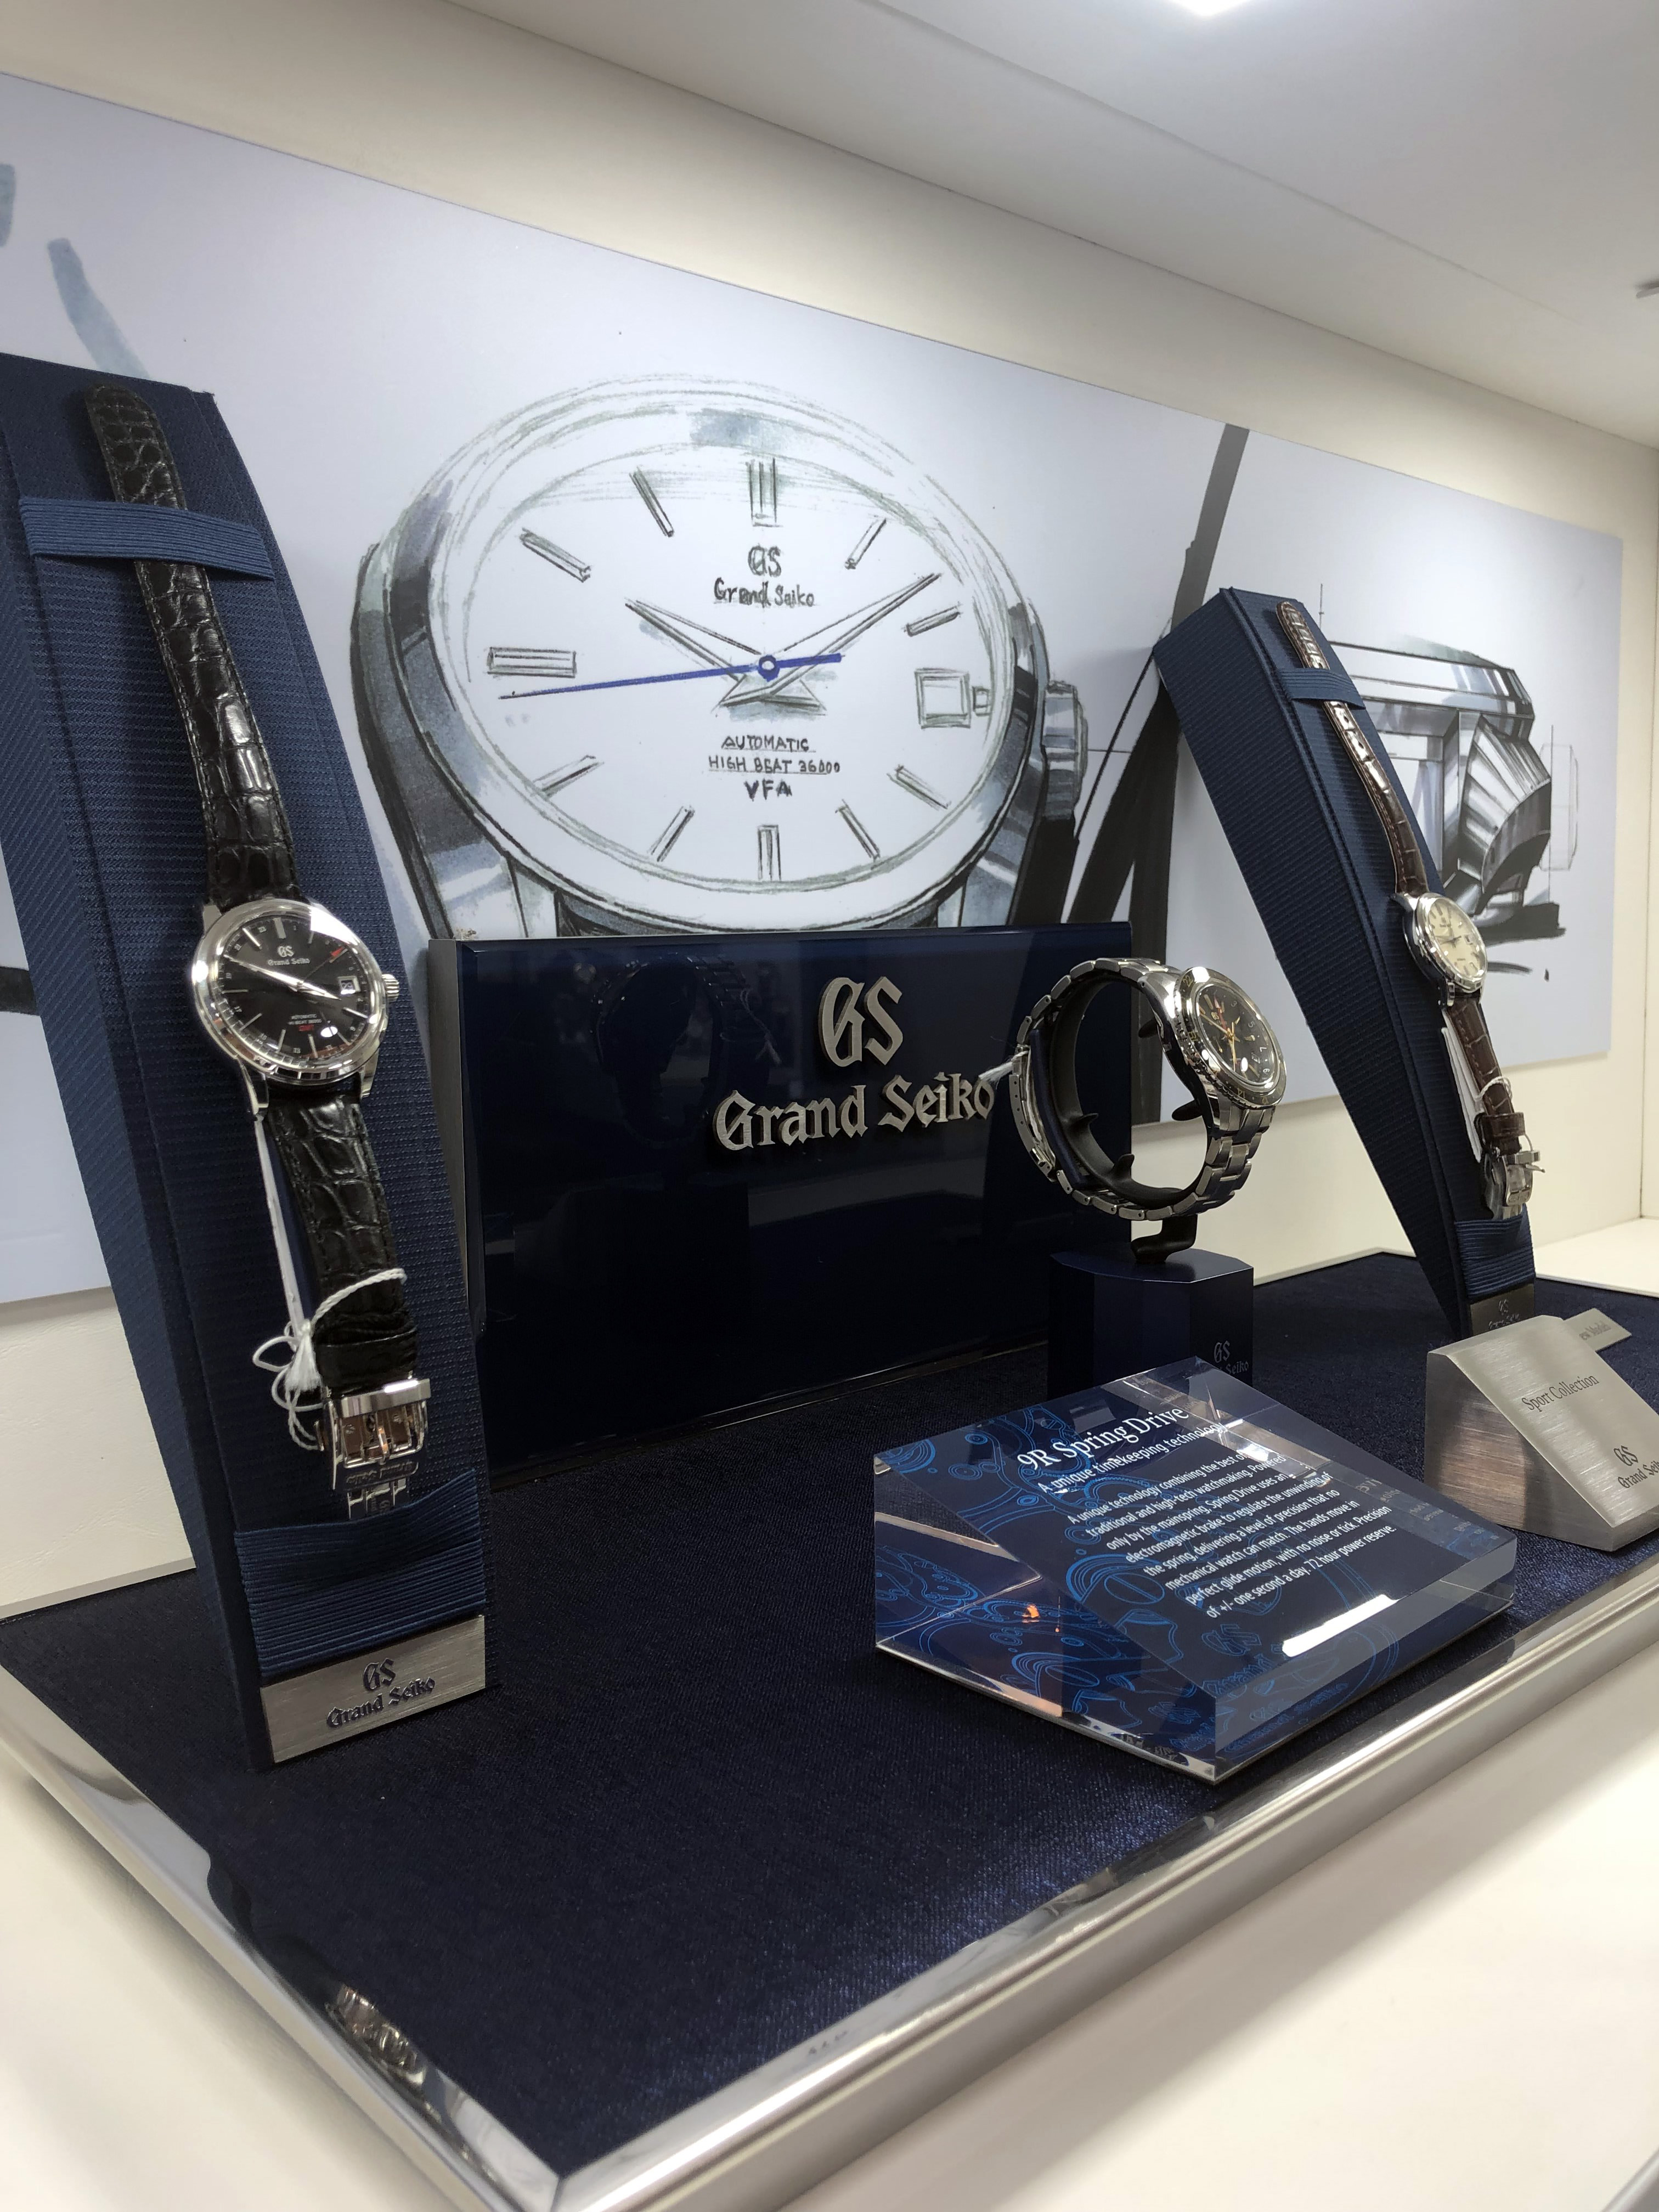 The boutique offers a range of watches from Grand Seiko's latest collection